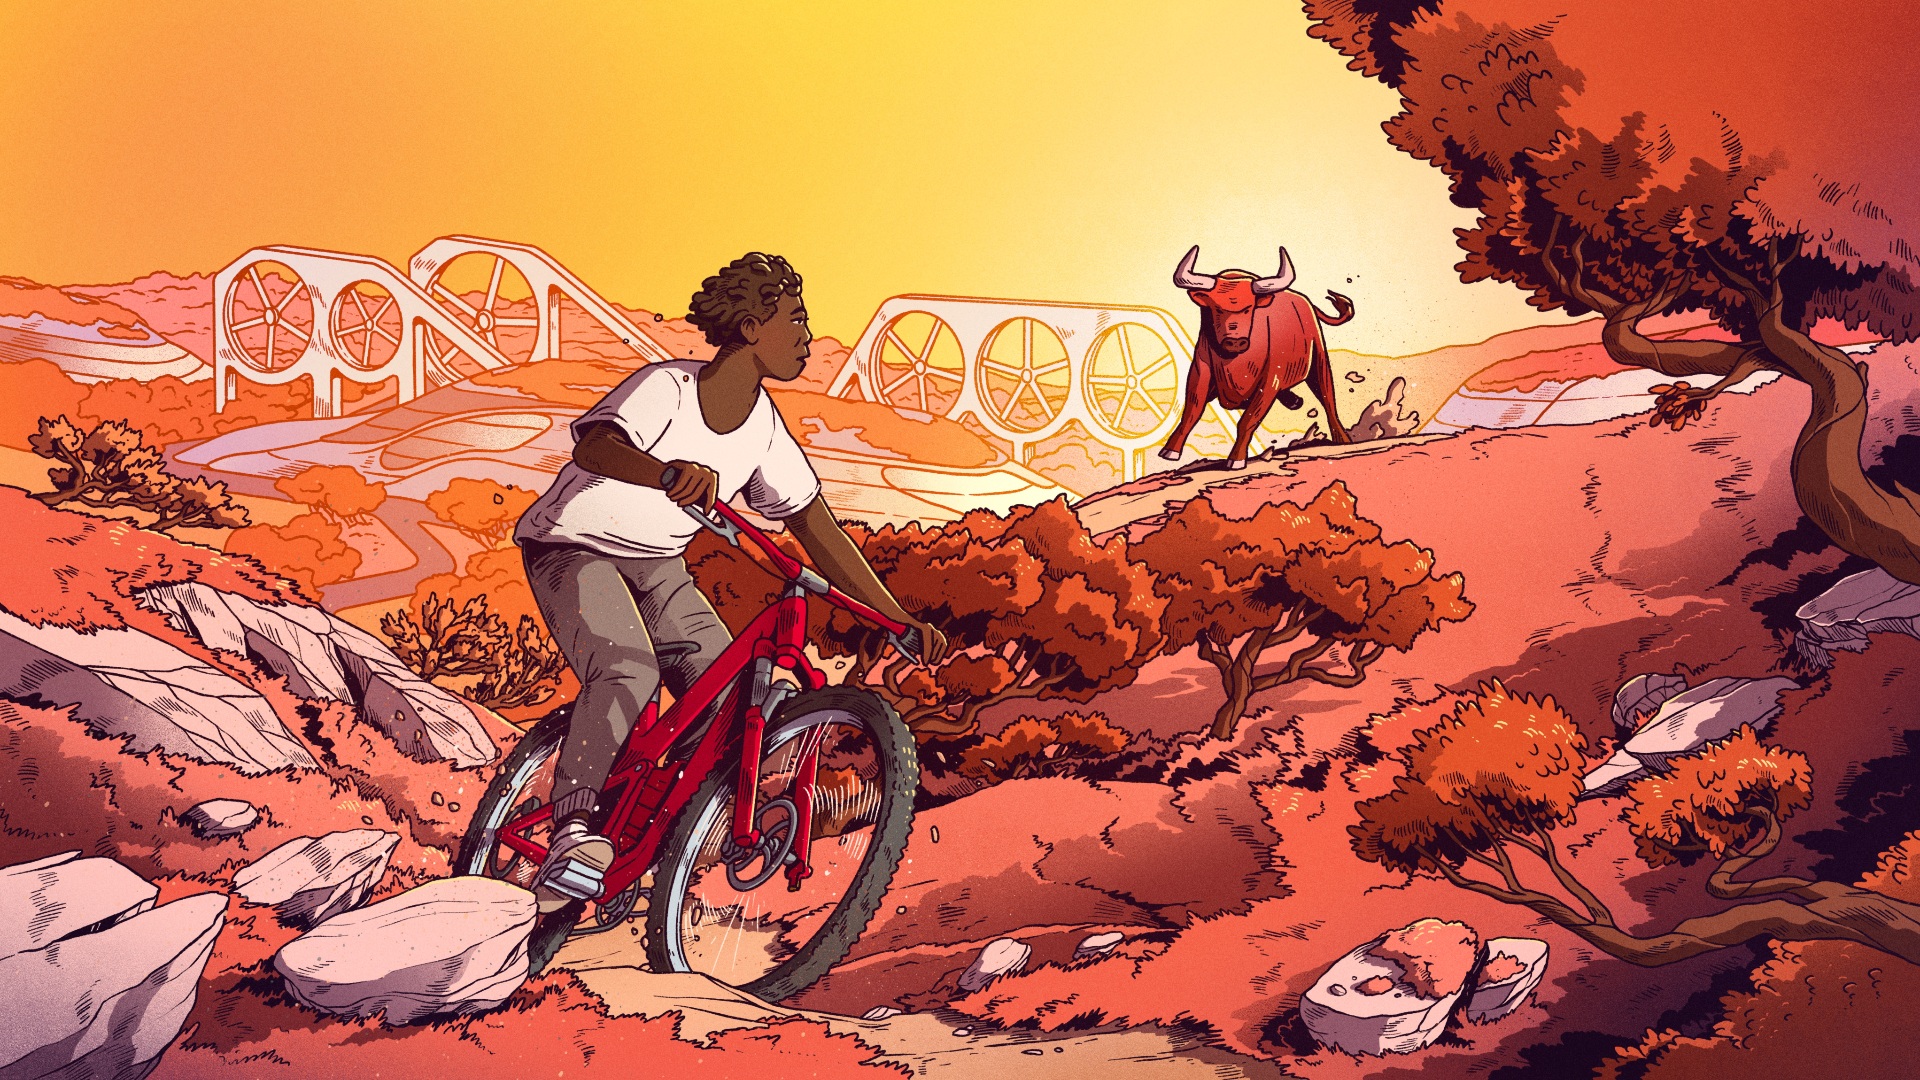 An illustration shows a boy on a bike escaping from a chasing bull. Wind turbines are visible in the background.